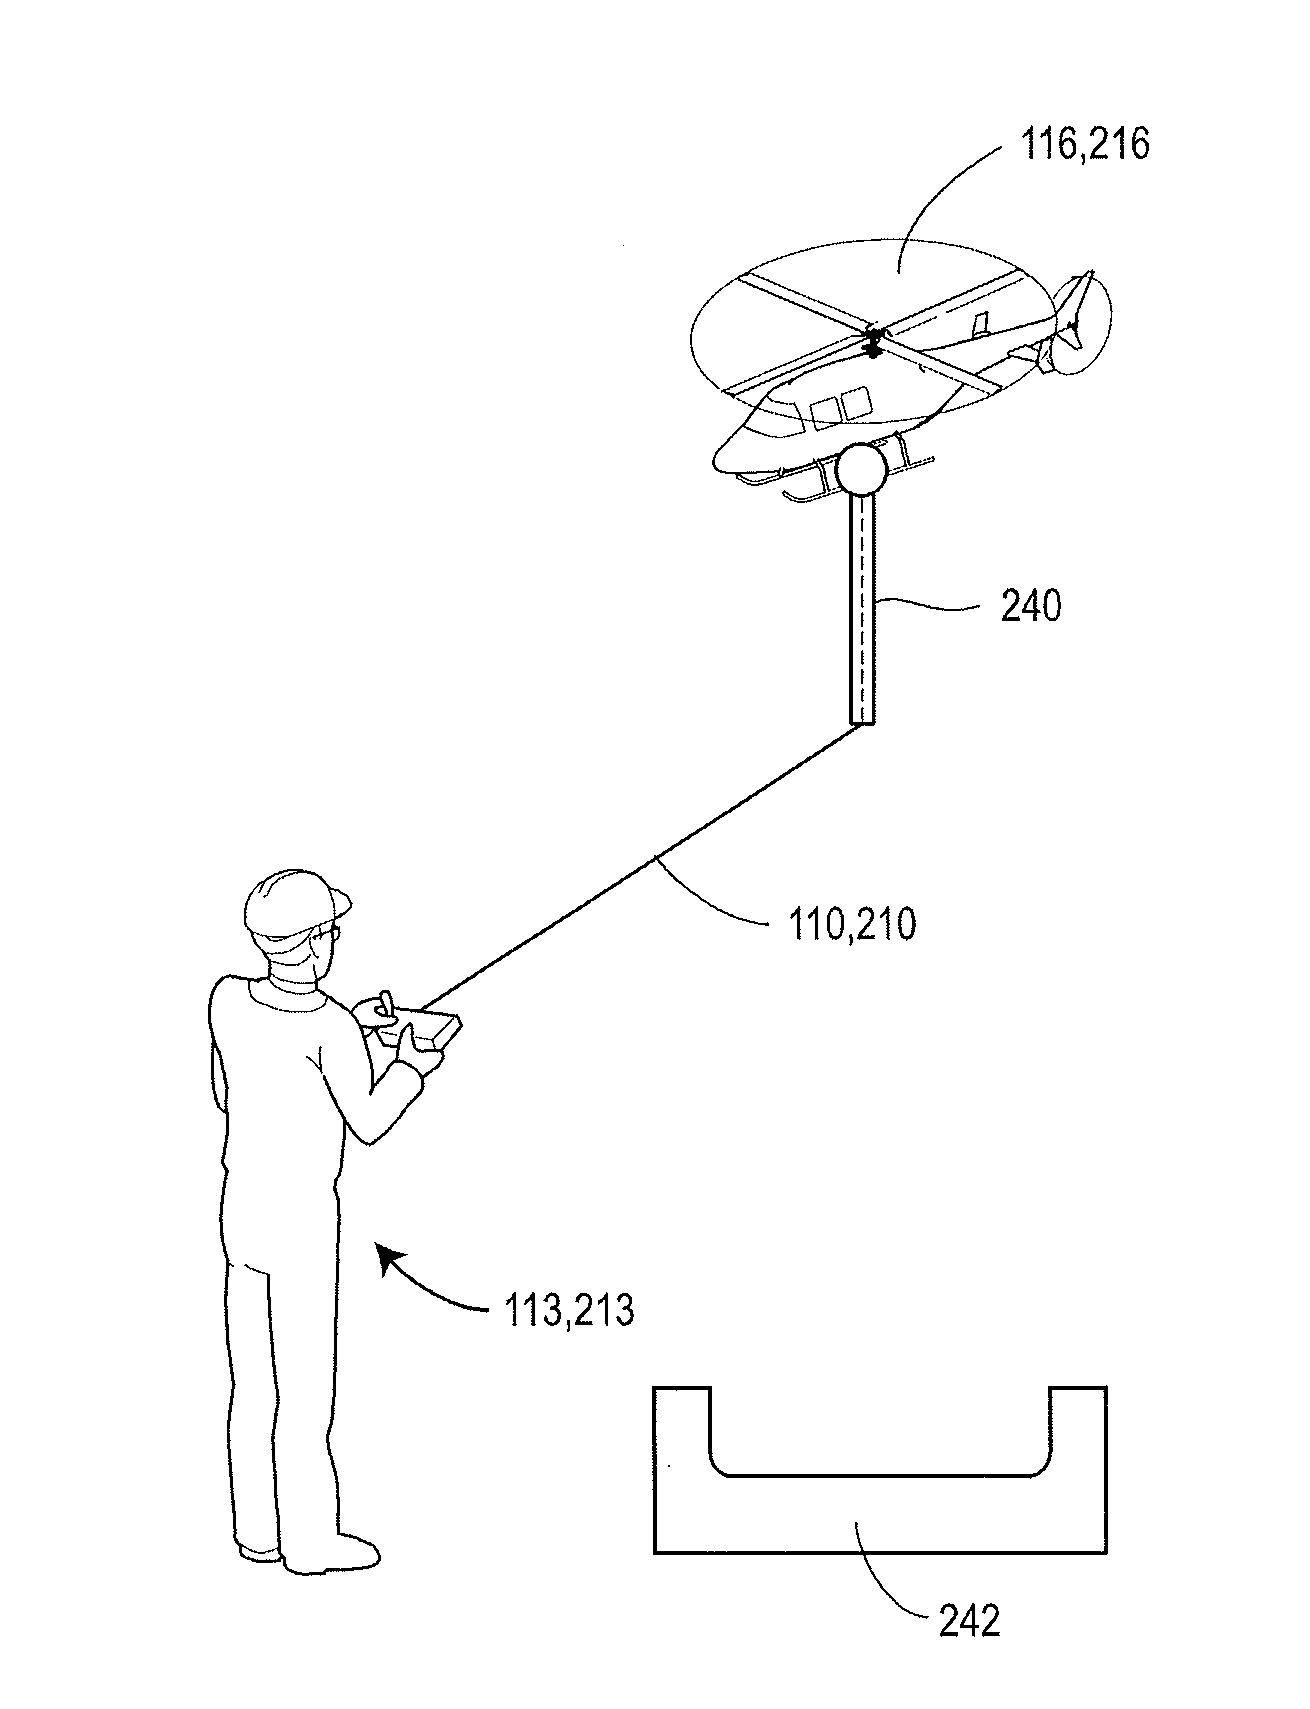 Tethering system and method for remote device